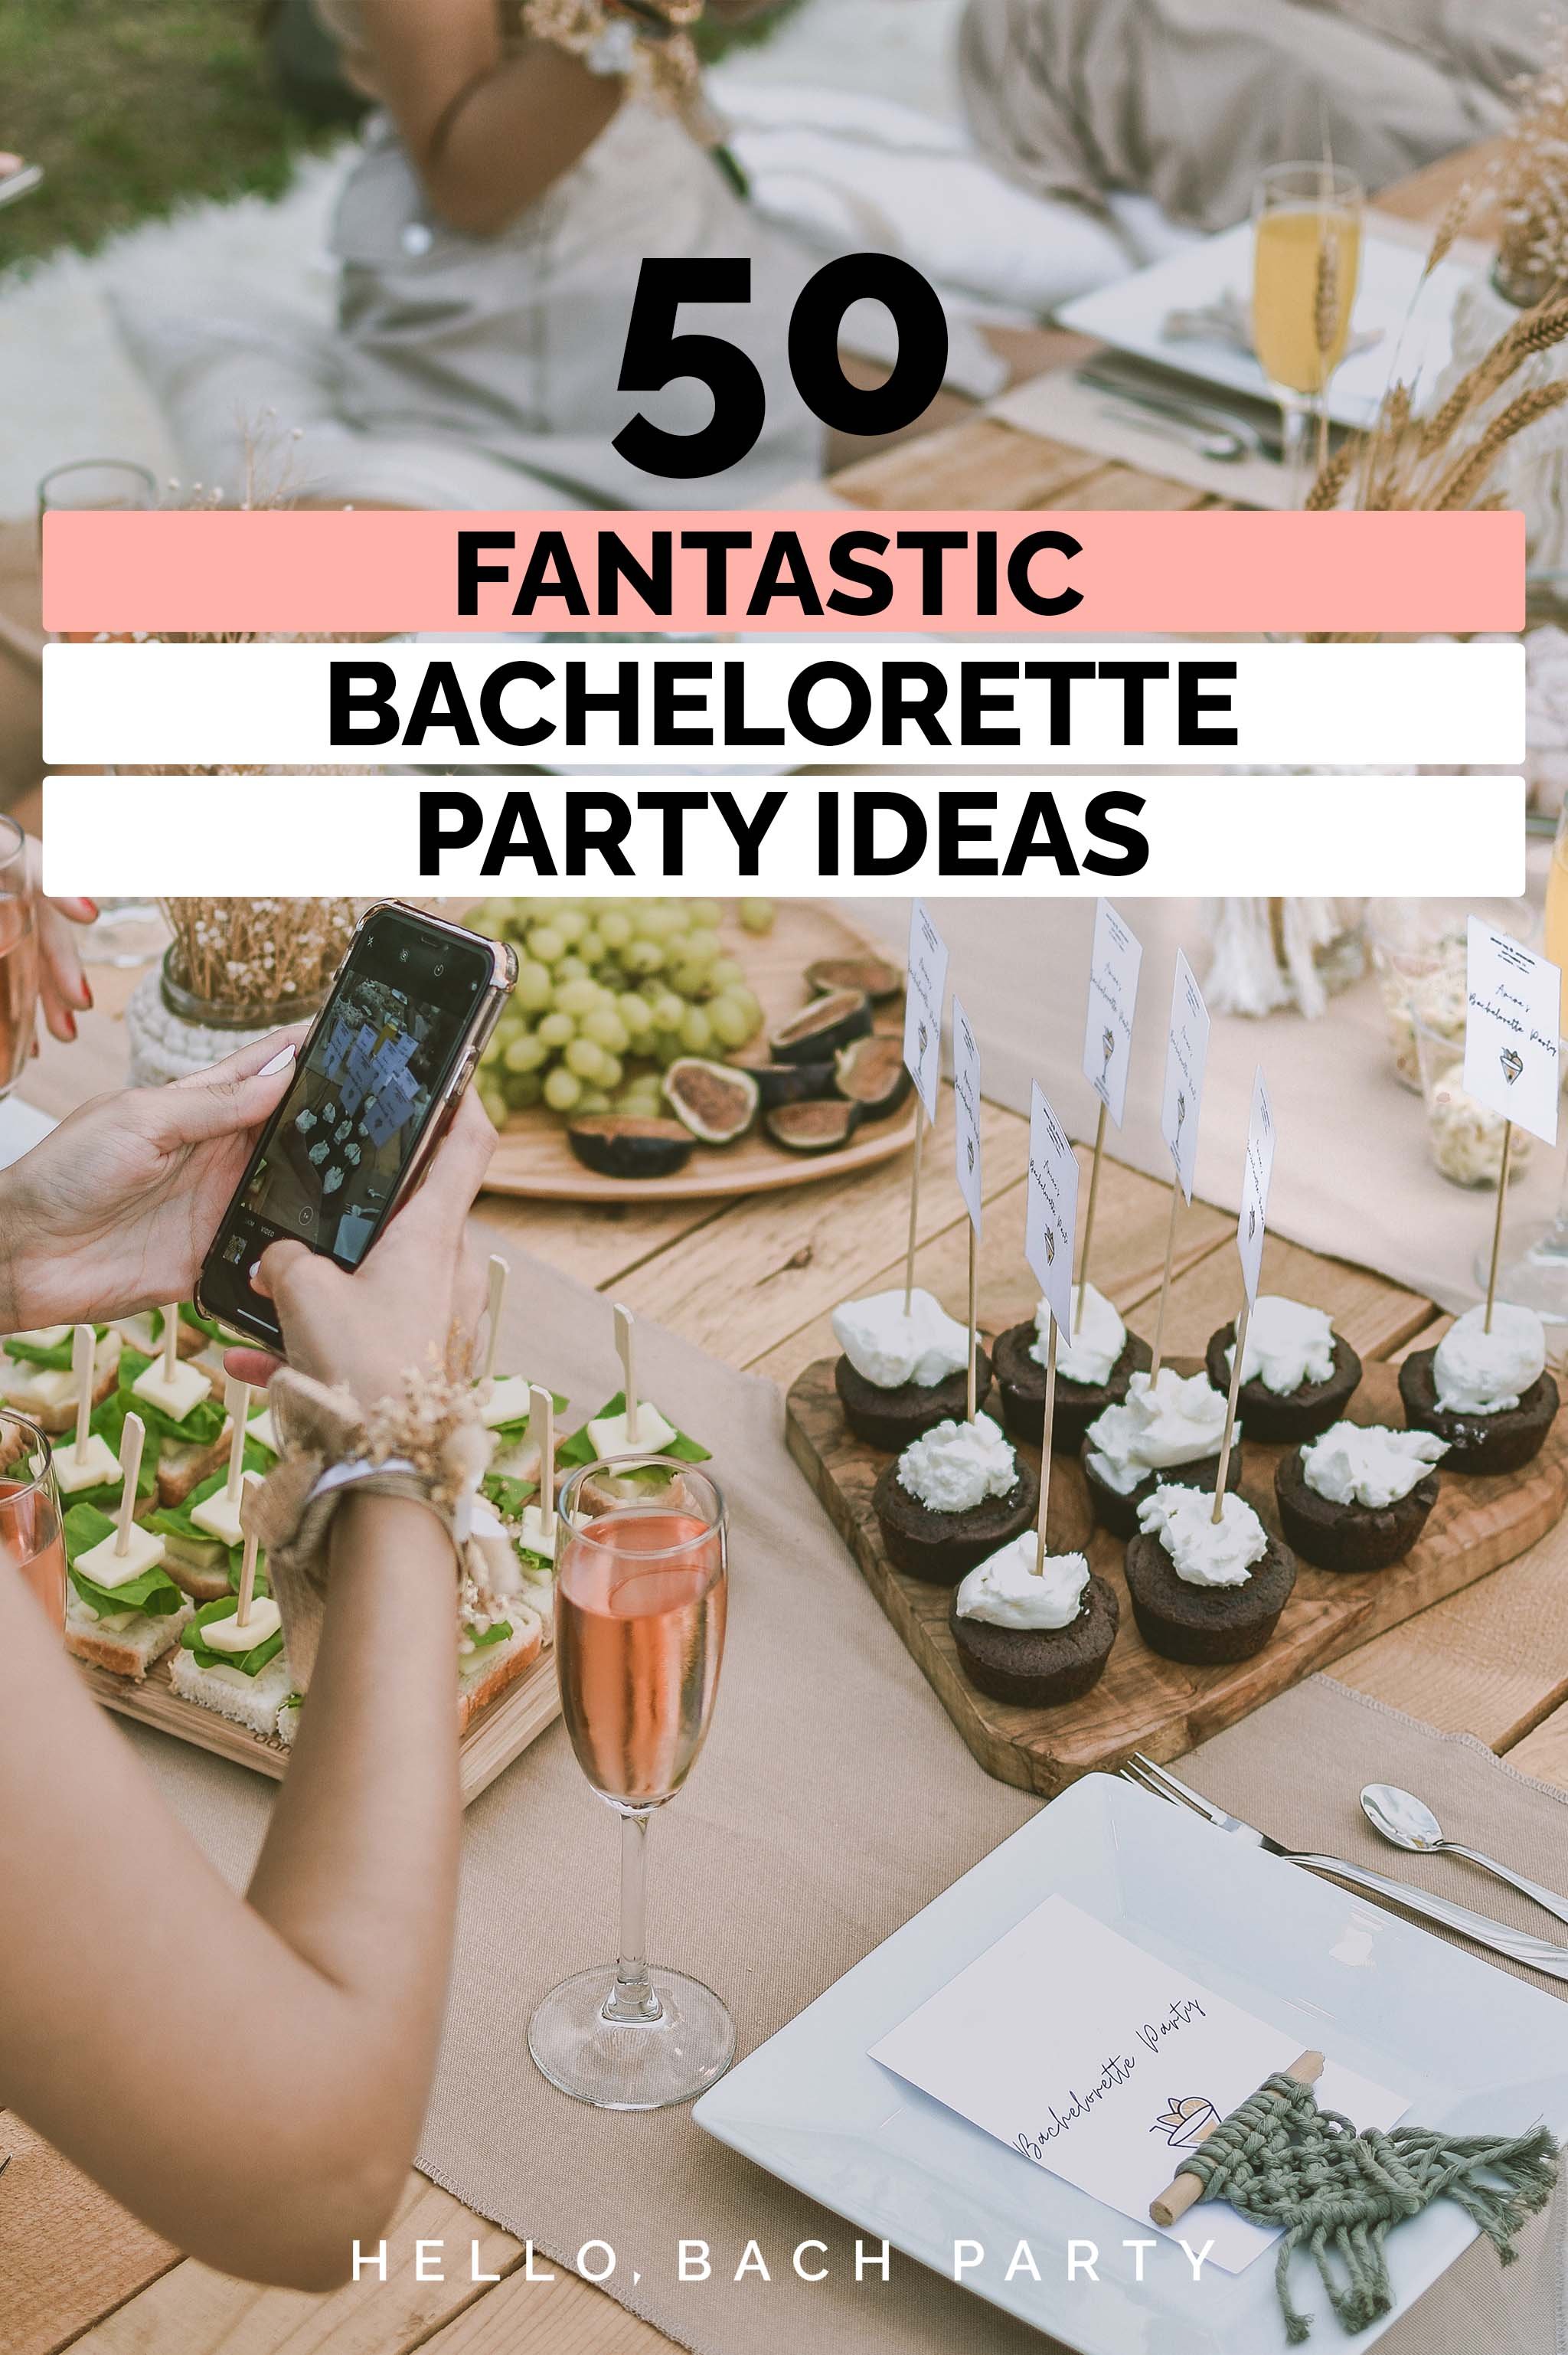 What are some good bachelorette party ideas